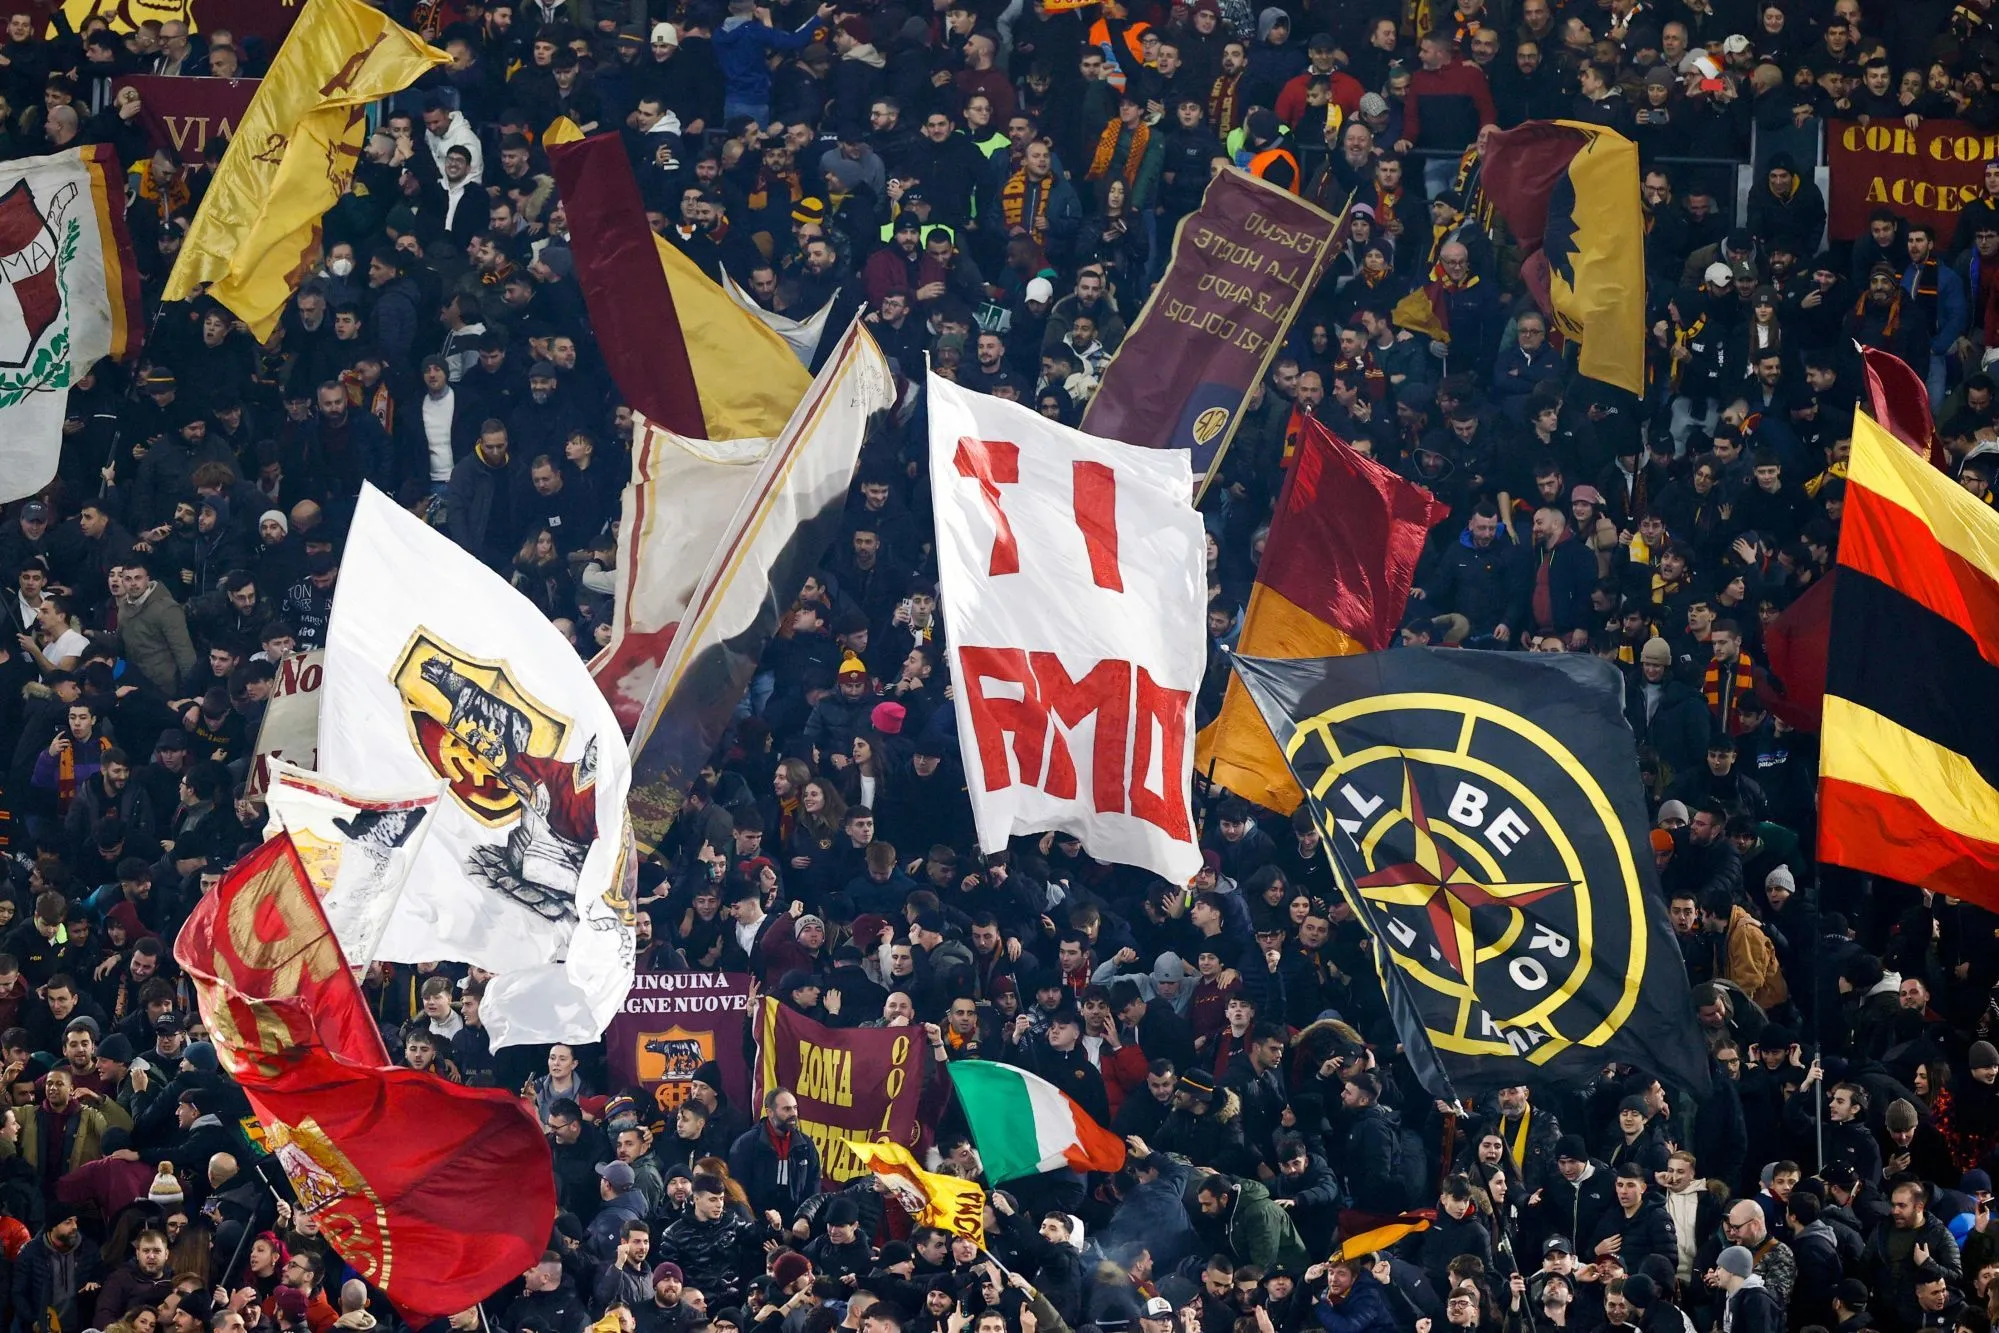 Rom, Italien, 15.01.2023: . Fans vom AS Roma waehrend des Spiels der Serie A zwischen AS Rom vs AC Florenz im Olimpico di Roma am 15. Januar 2023 in Rom, Italien. (Foto von Matteo Ciambelli/DeFodi Images) Rome, Italy, 15.01.2023: . Supporters of AS Roma during the Serie A match between AS Roma vs ACF Fiorentina at Olimpico di Roma on Januar 15, 2023 in Rome, Italy. (Photo by Matteo Ciambelli/DeFodi Images) - Photo by Icon sport